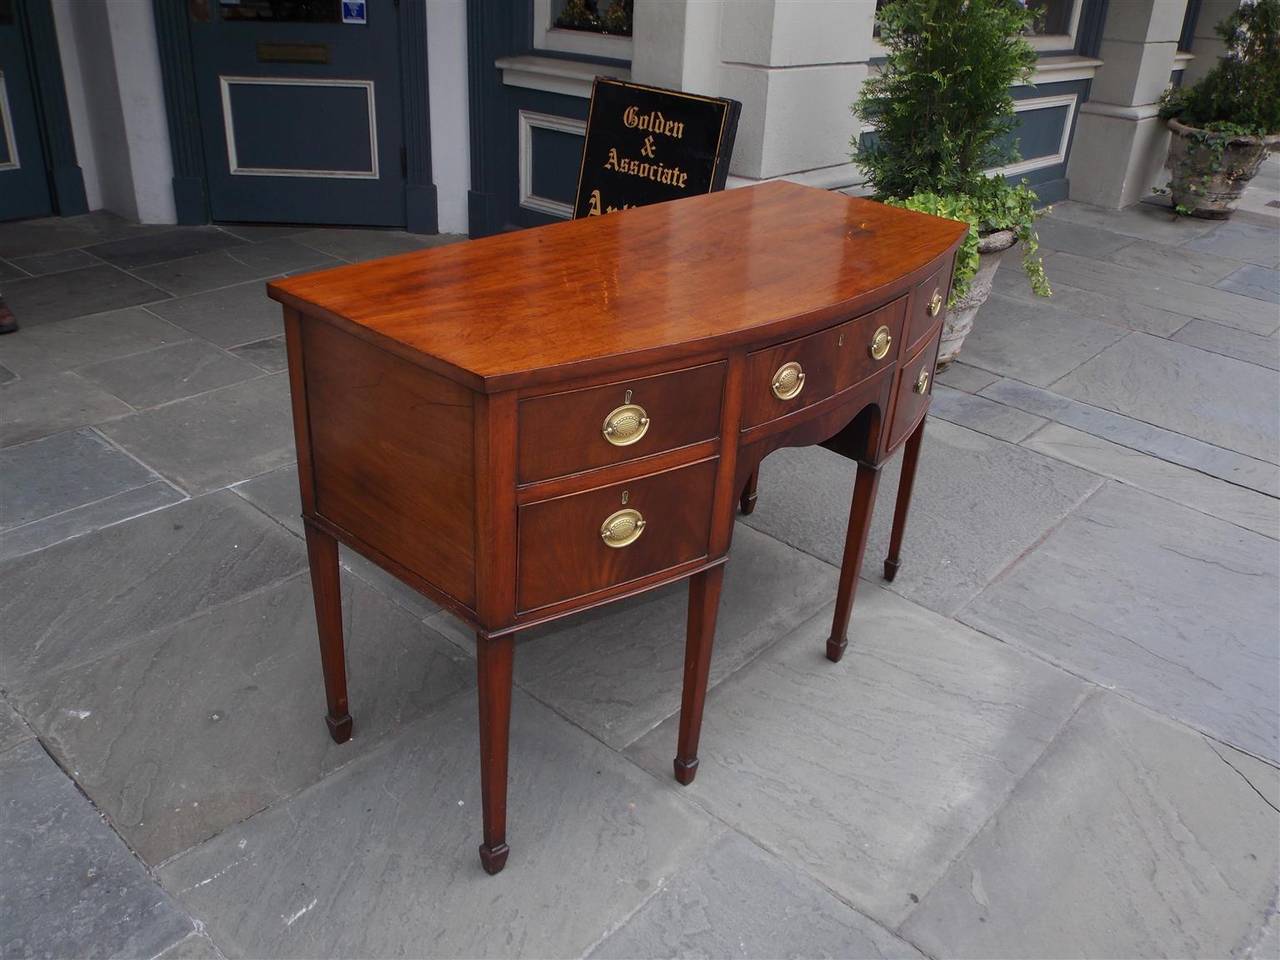 English Hepplewhite mahogany five-drawer bow front sideboard with carved scalloped skirt, original brasses, and terminating on tapered legs with spade feet. Sideboard has a one board top, Early 19th century.